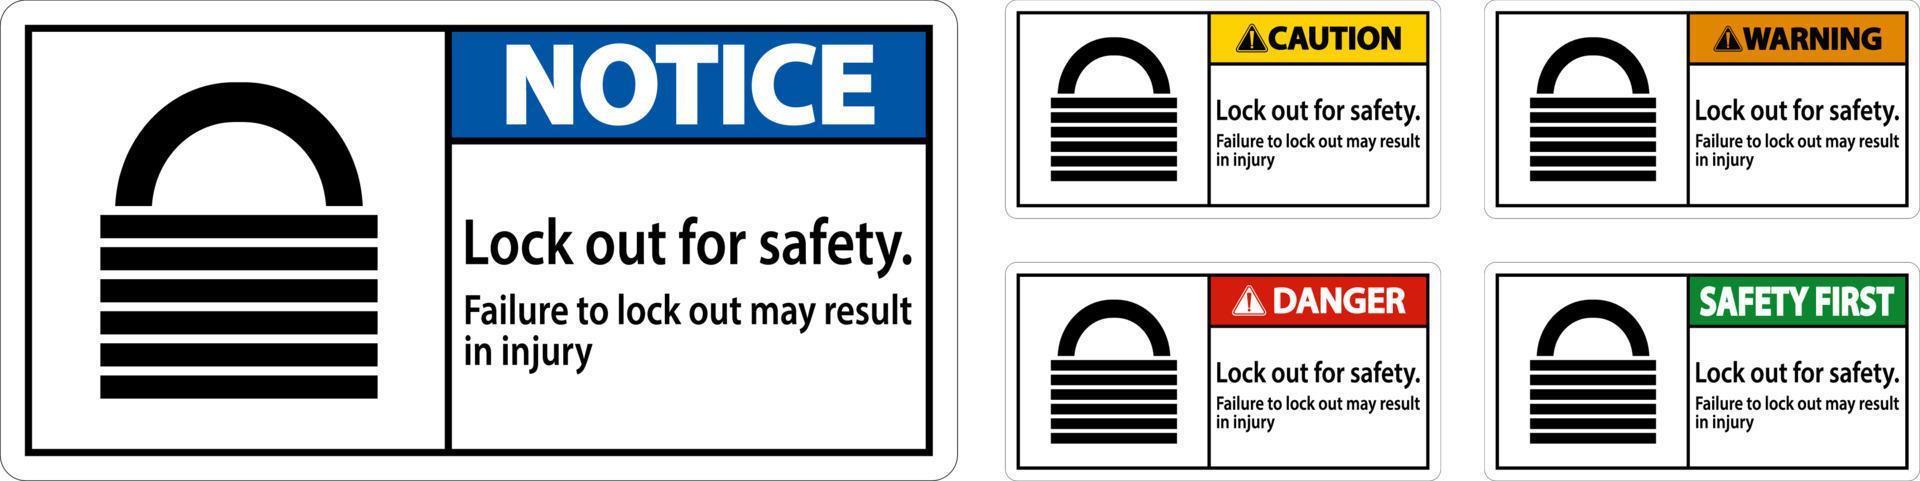 Caution Lock Out For Safety. Failure To Lock Out May Result In Injury Sign vector